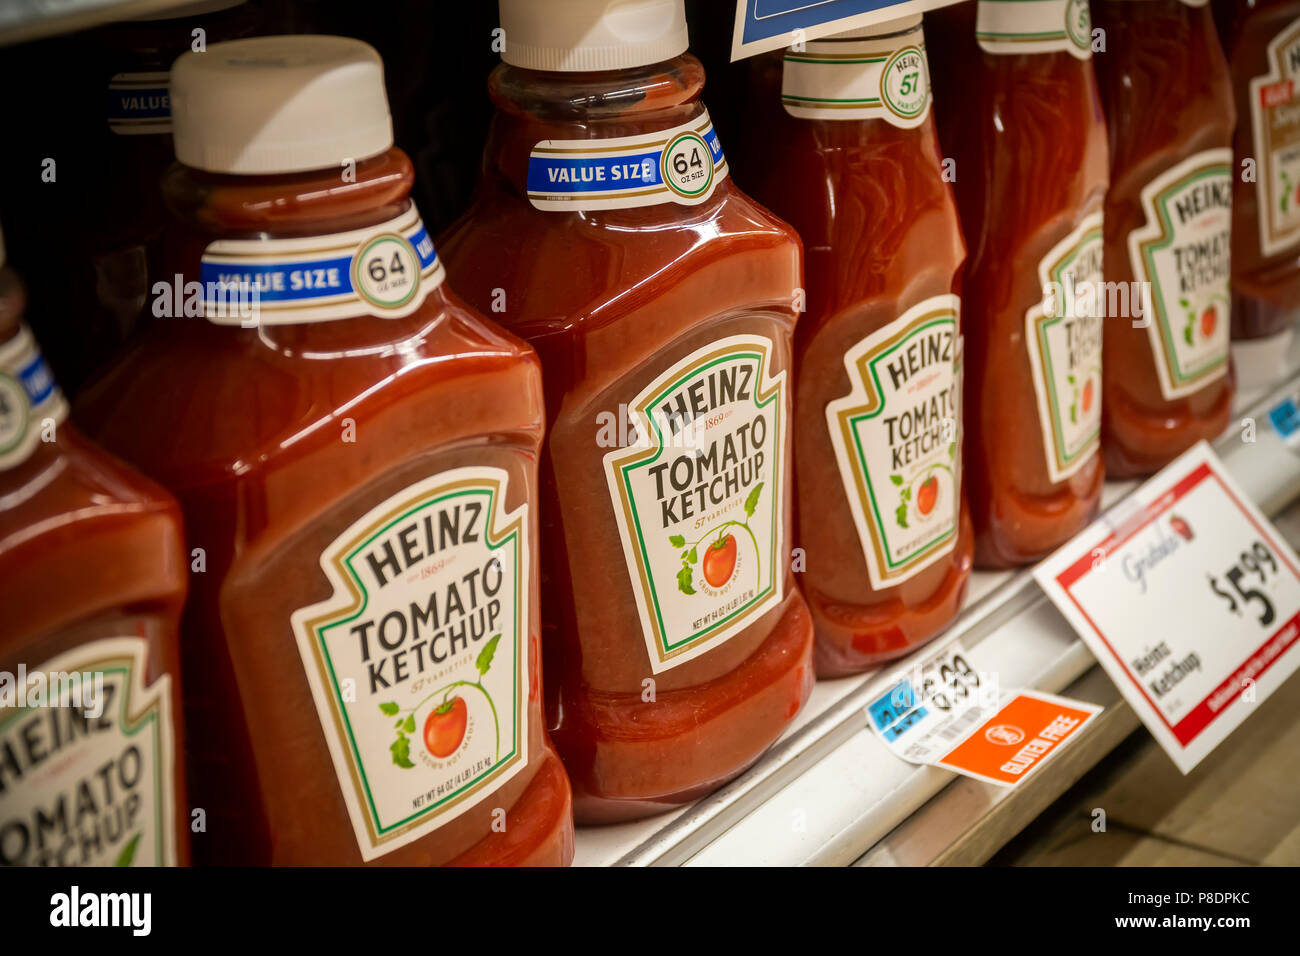 Bottles of Kraft Heinz ketchup on a supermarket shelf in New York on Tuesday July 3, 2018. In retaliation for the Trump administration instituting tariffs on Canadian steel, Canada has instituted tariffs on a number of products including a 10% tariff on ketchup. (© Richard B. Levine) Stock Photo